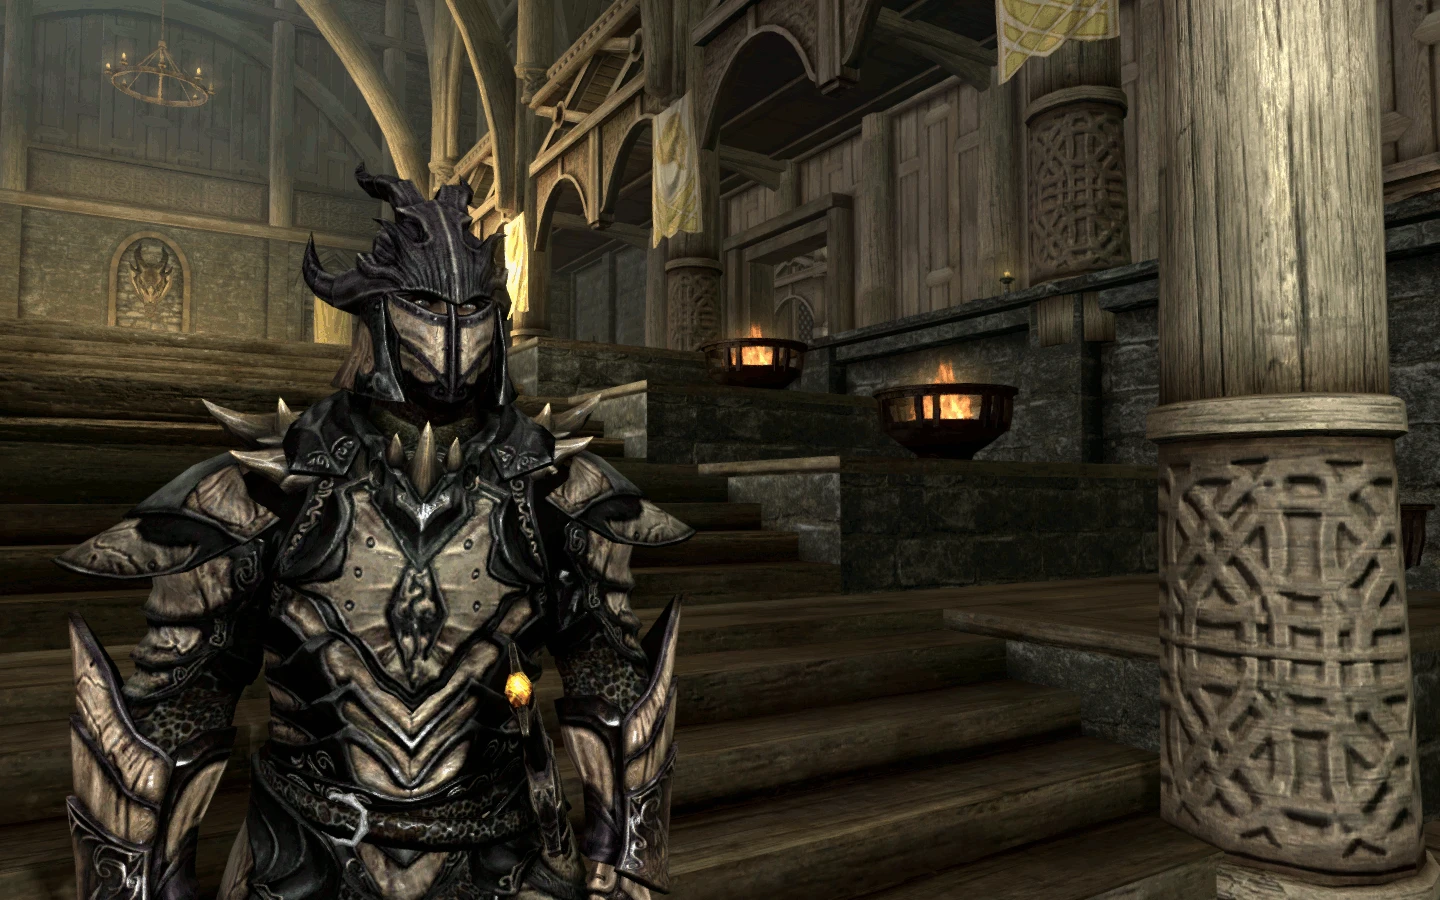 dragon bone mage armor by natterforme at skyrim nexus mods and community.